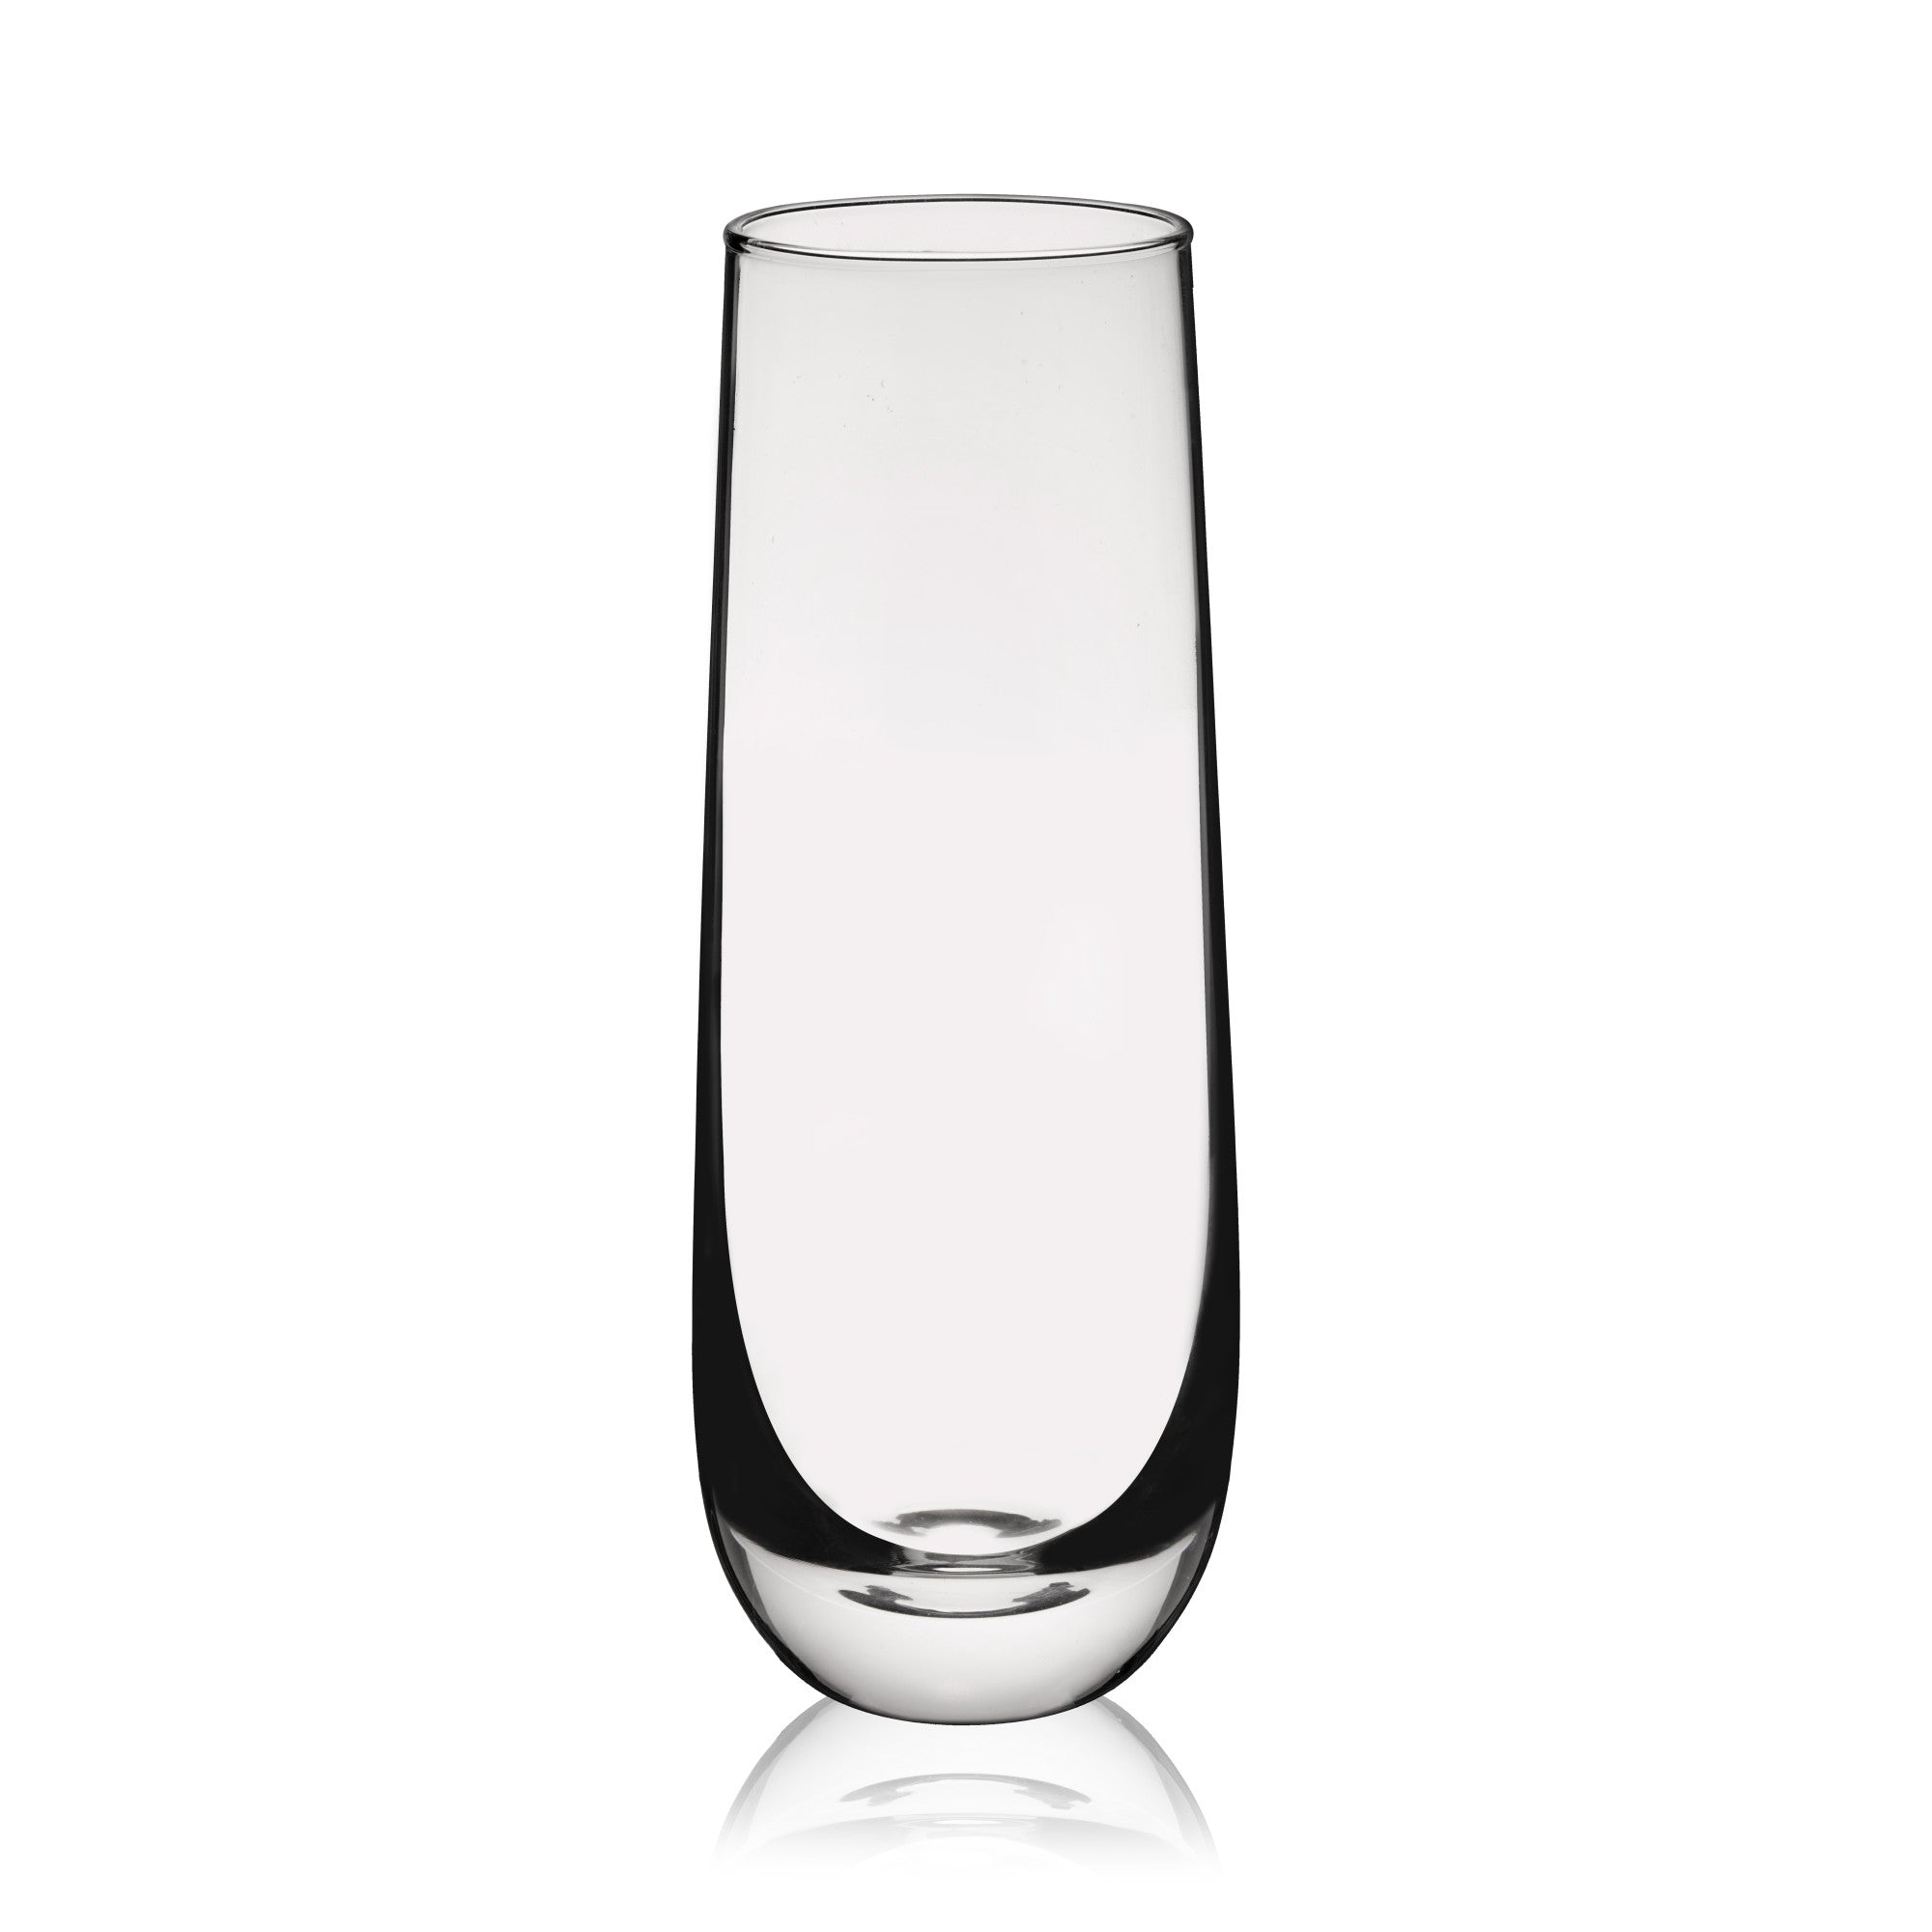 Stemless Champagne Glass by True (Set of 4)